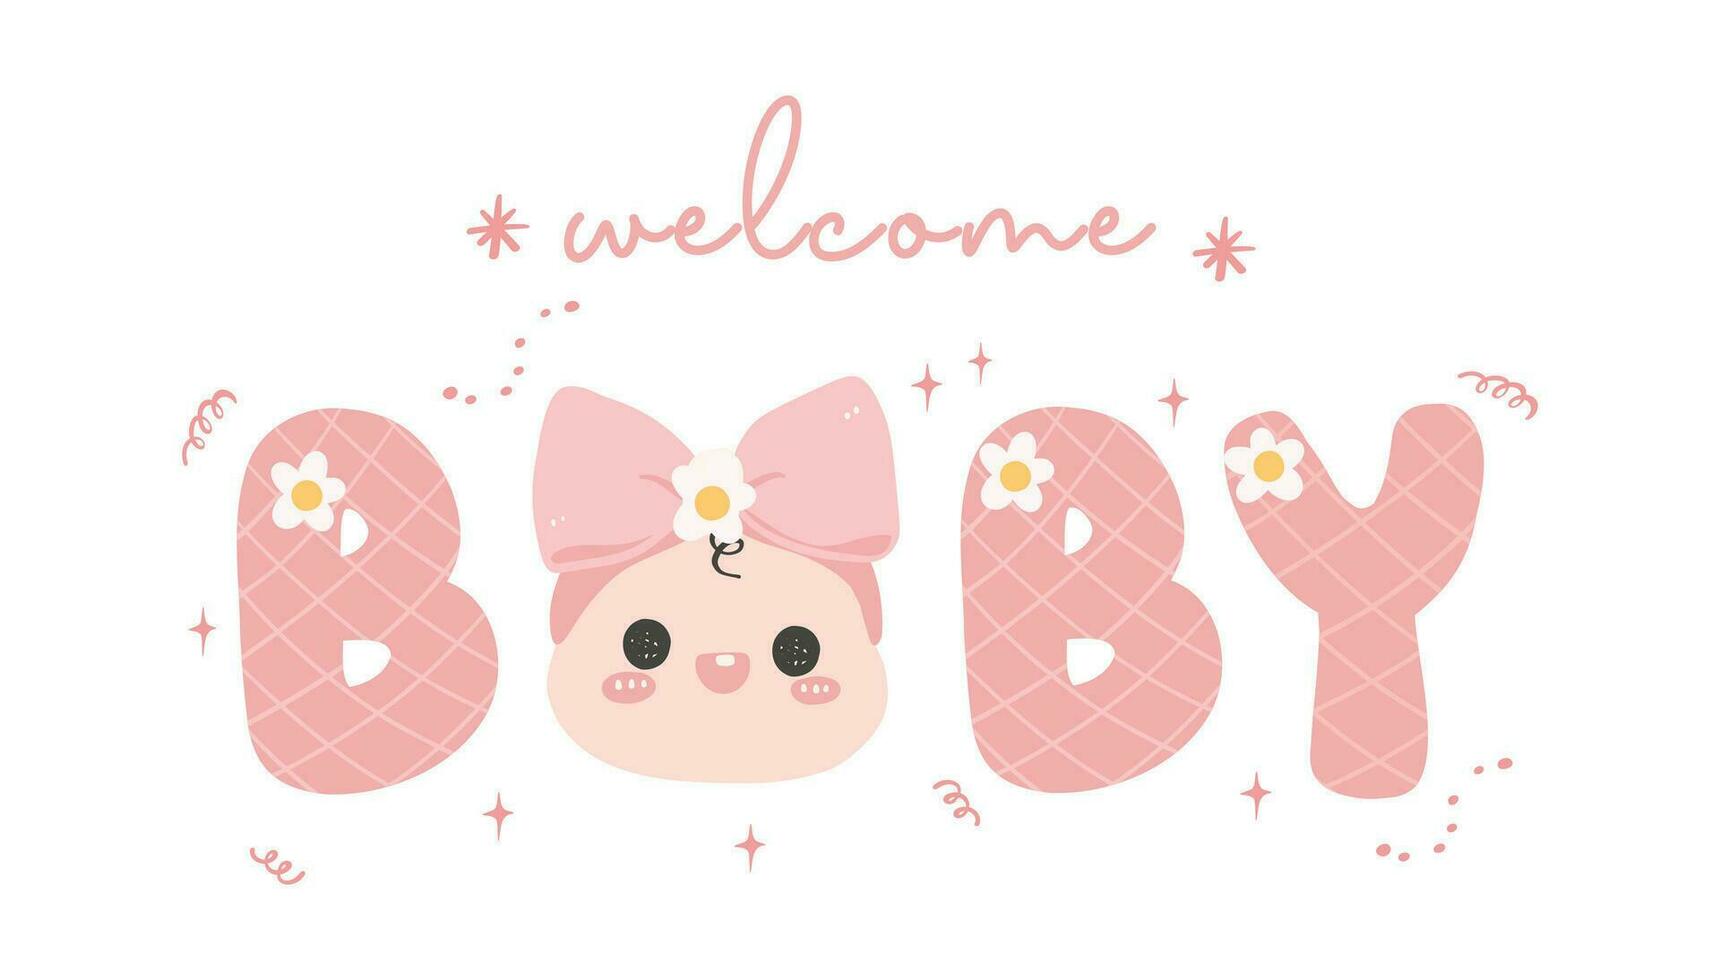 Cute Baby Girl Shower in pink, Welcome baby girl banner, Perfect for invitaion greeting card, welcoming the little one into the family. vector